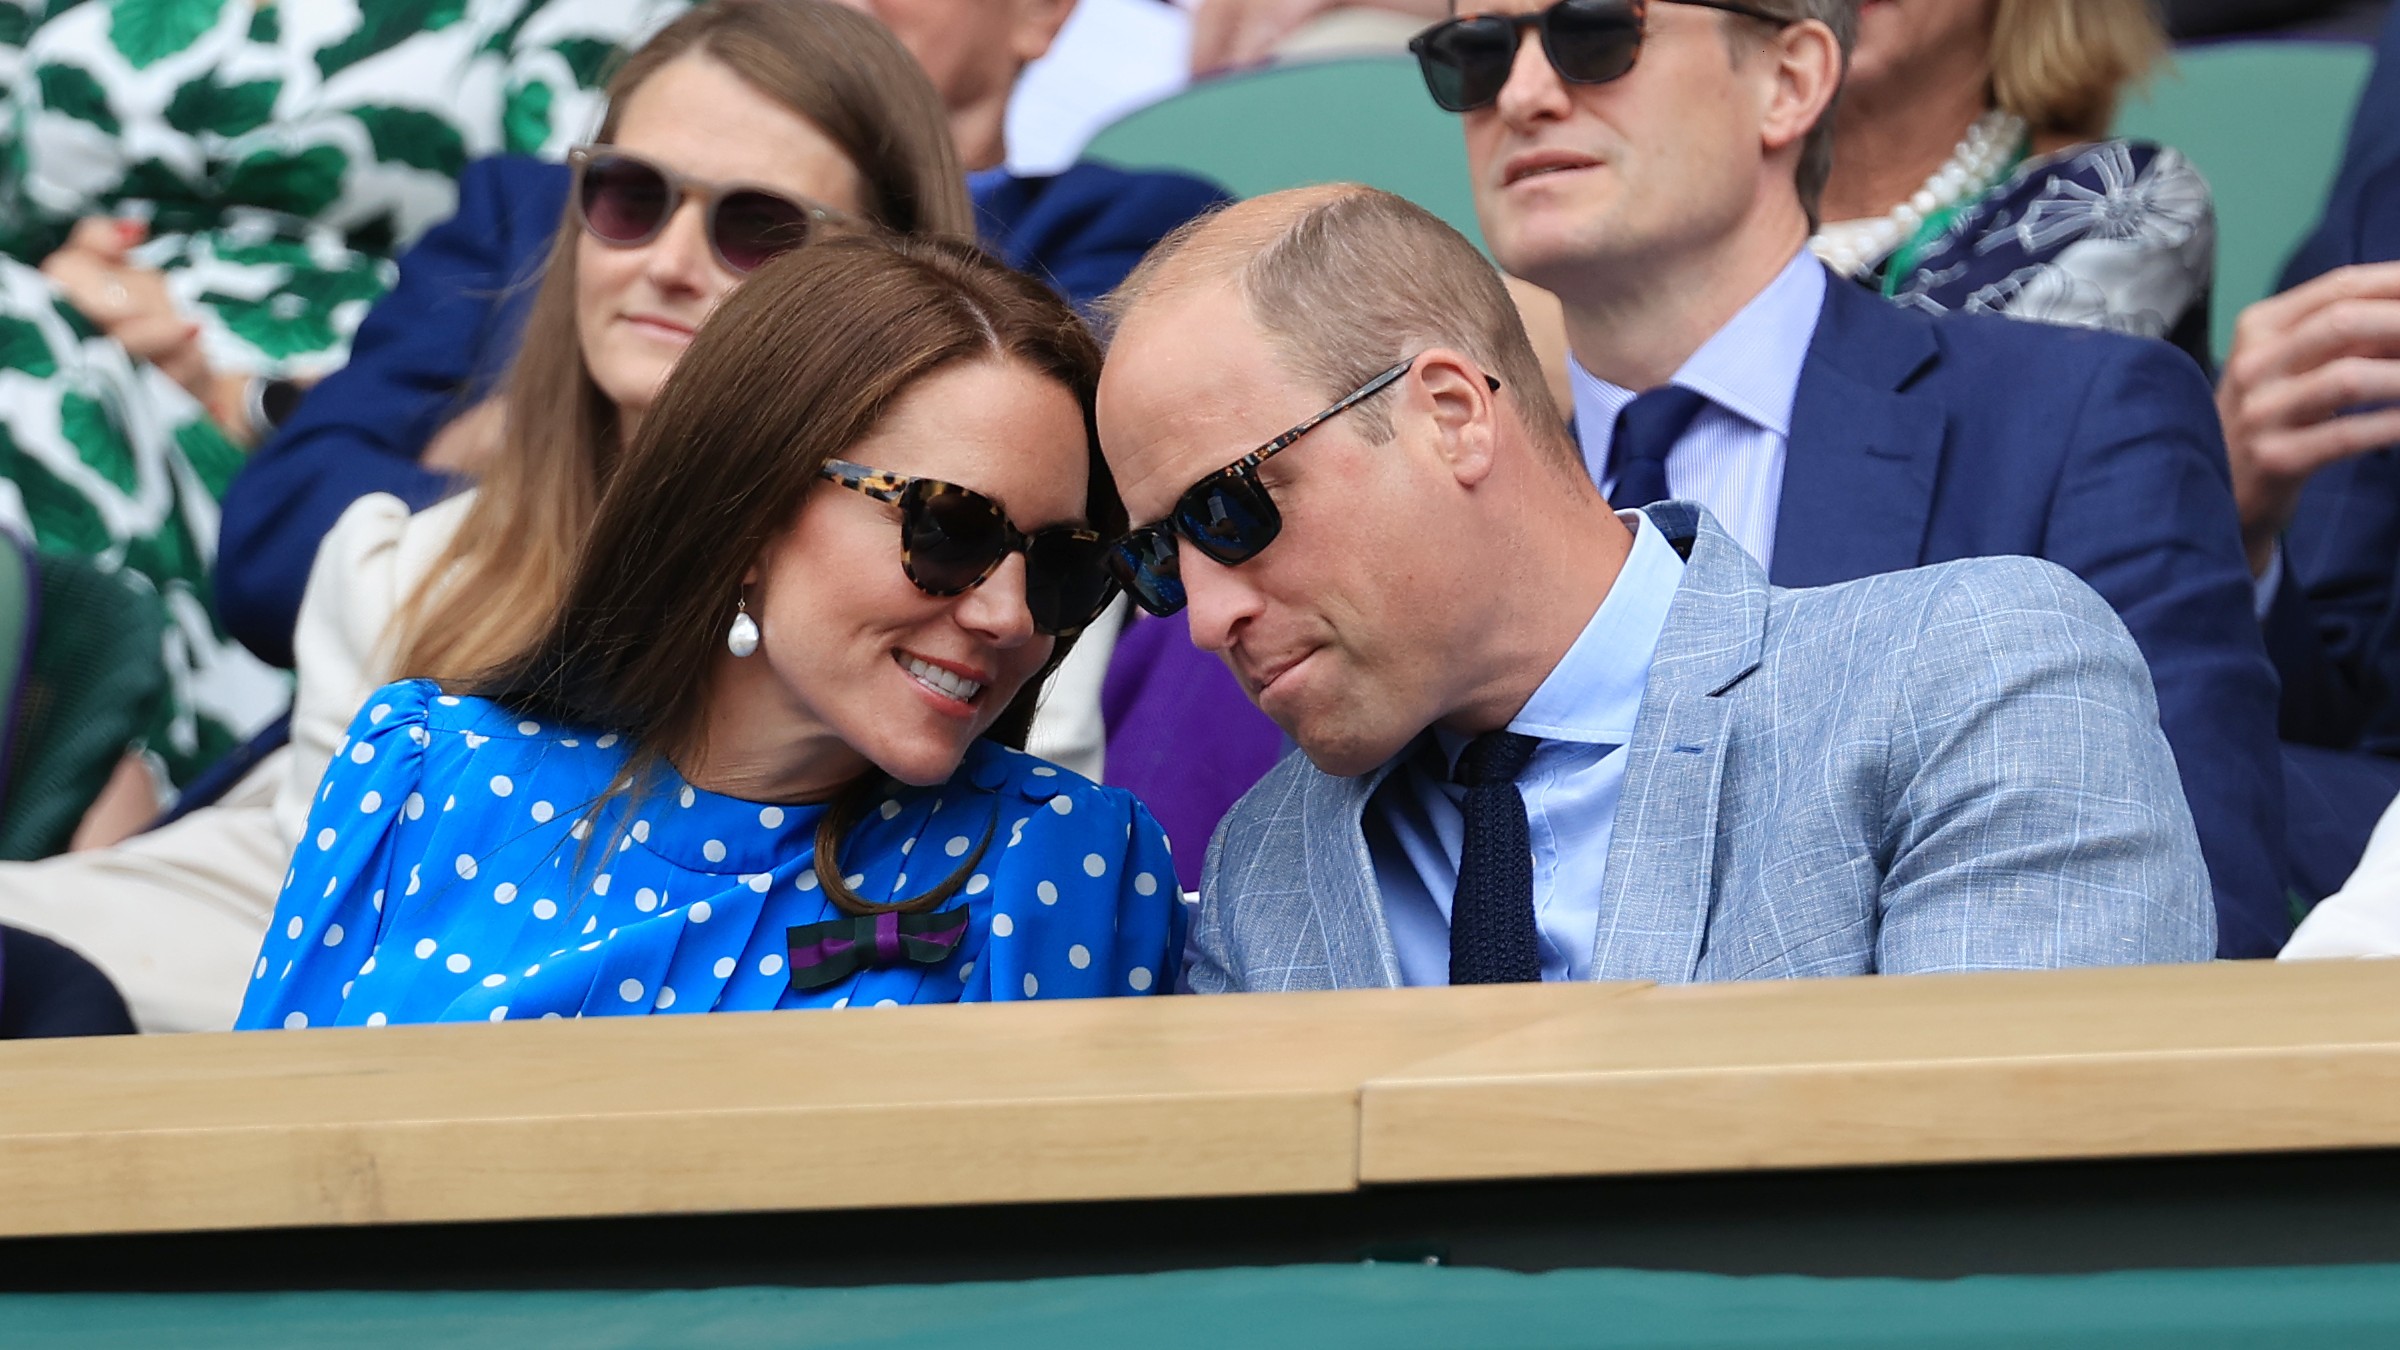 Prince William and Kate Middleton Were "In Complete Unison" at Wimbledon, Body Language Expert Says